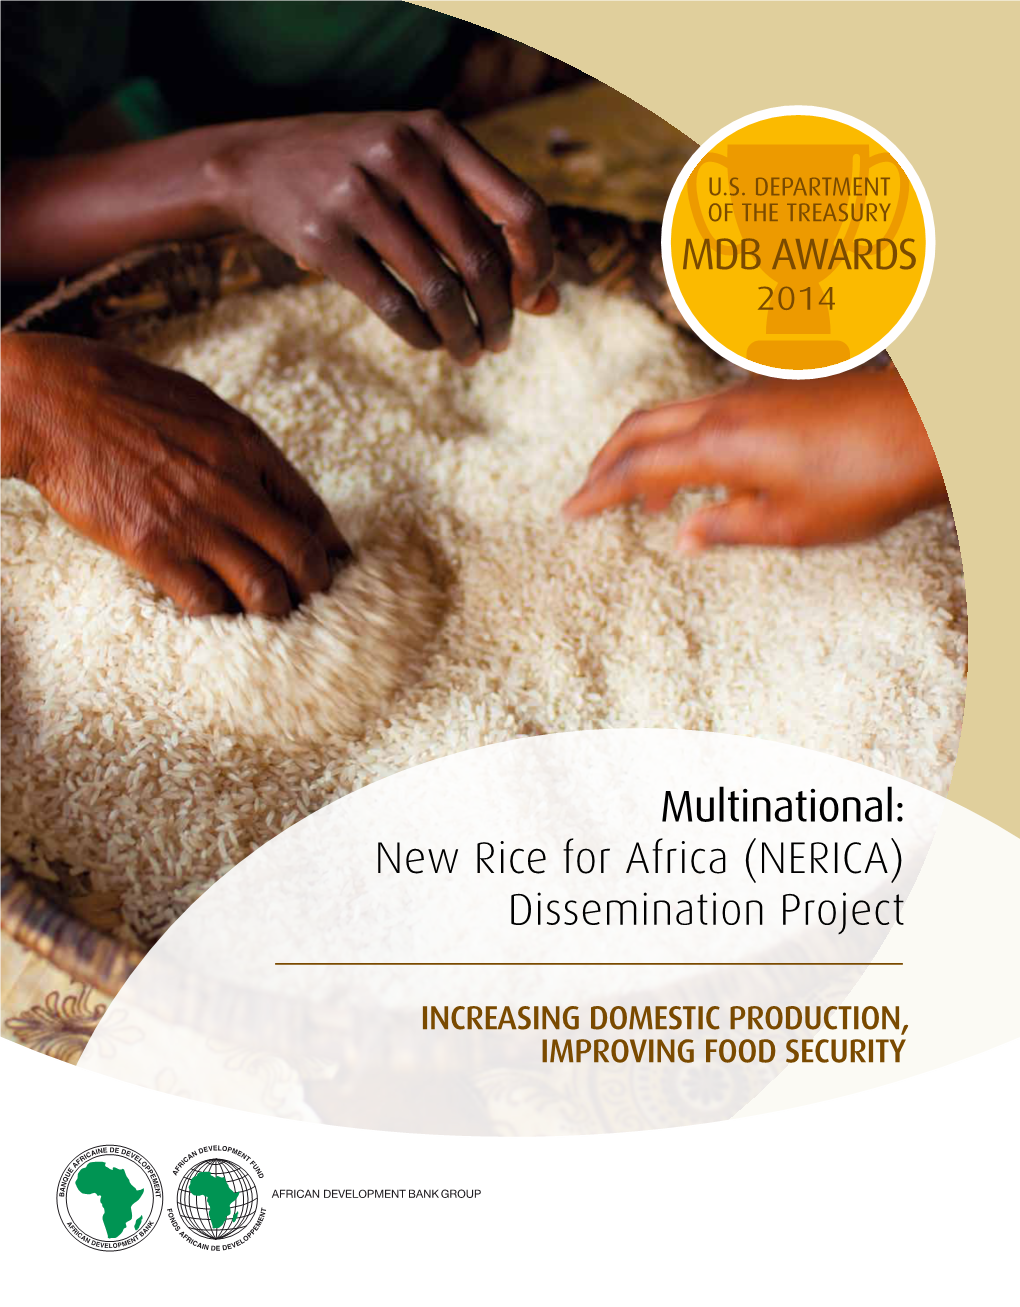 New Rice for Africa (NERICA) Dissemination Project